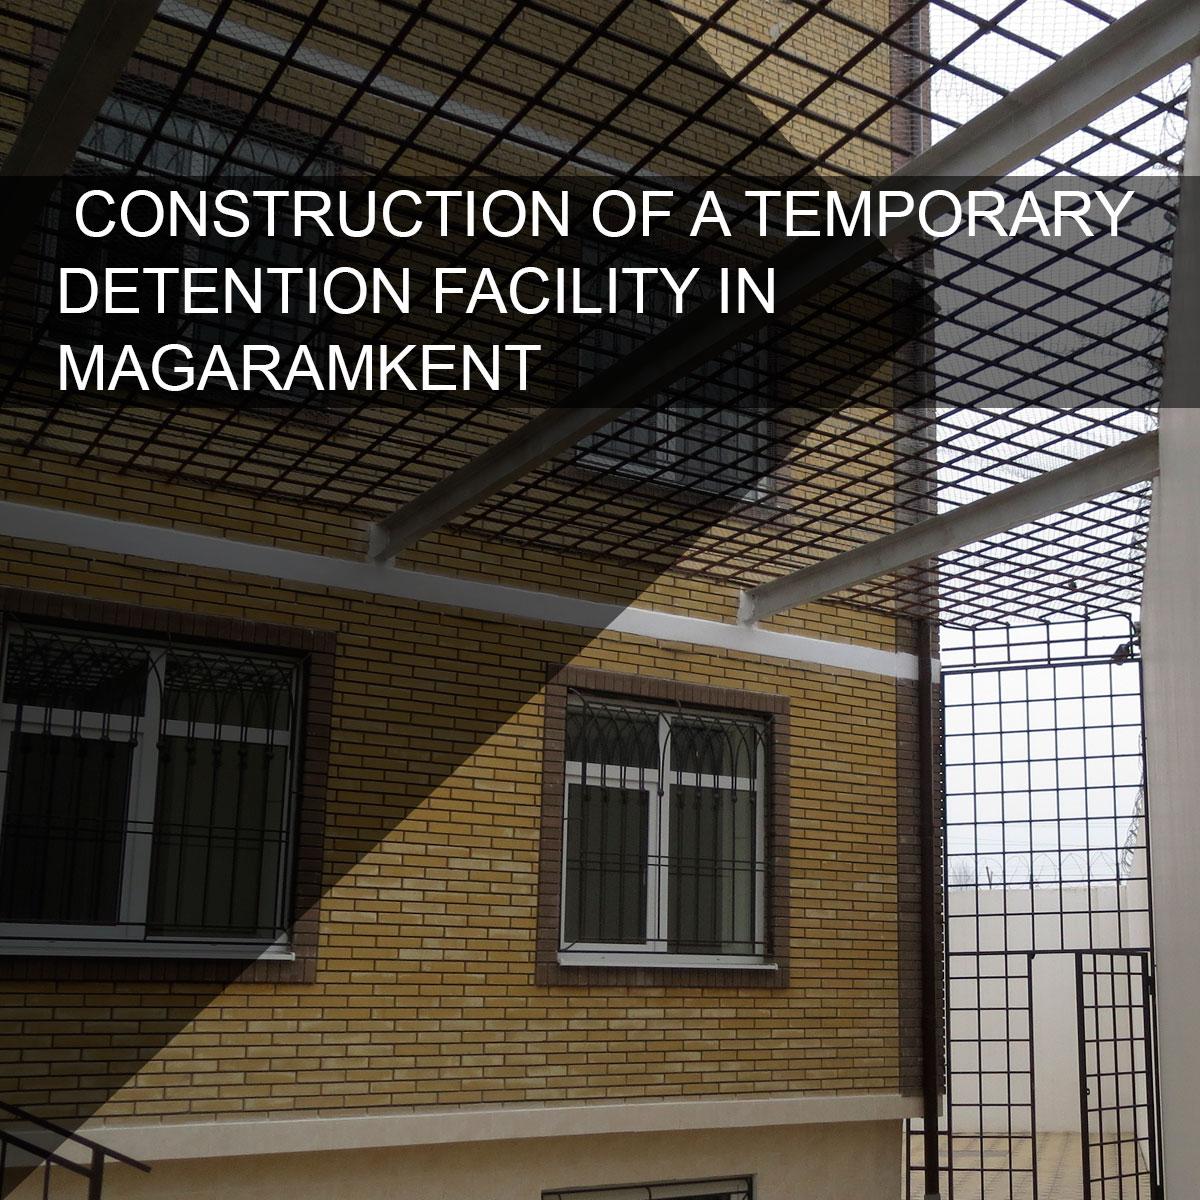 Construction of a temporary detention facility in s. Magaramkent